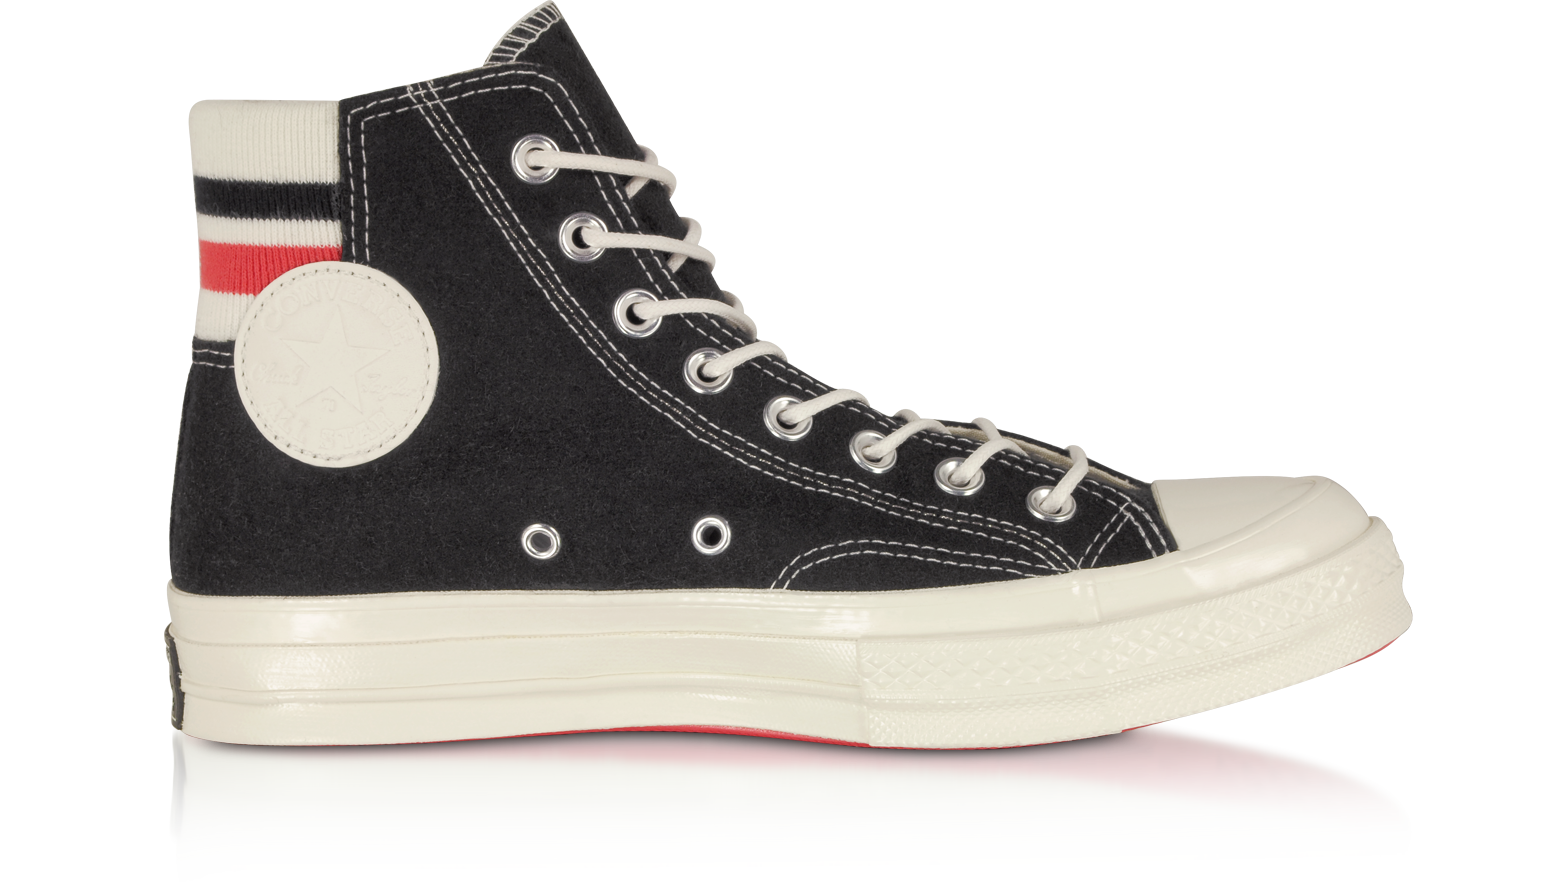 converse limited edition